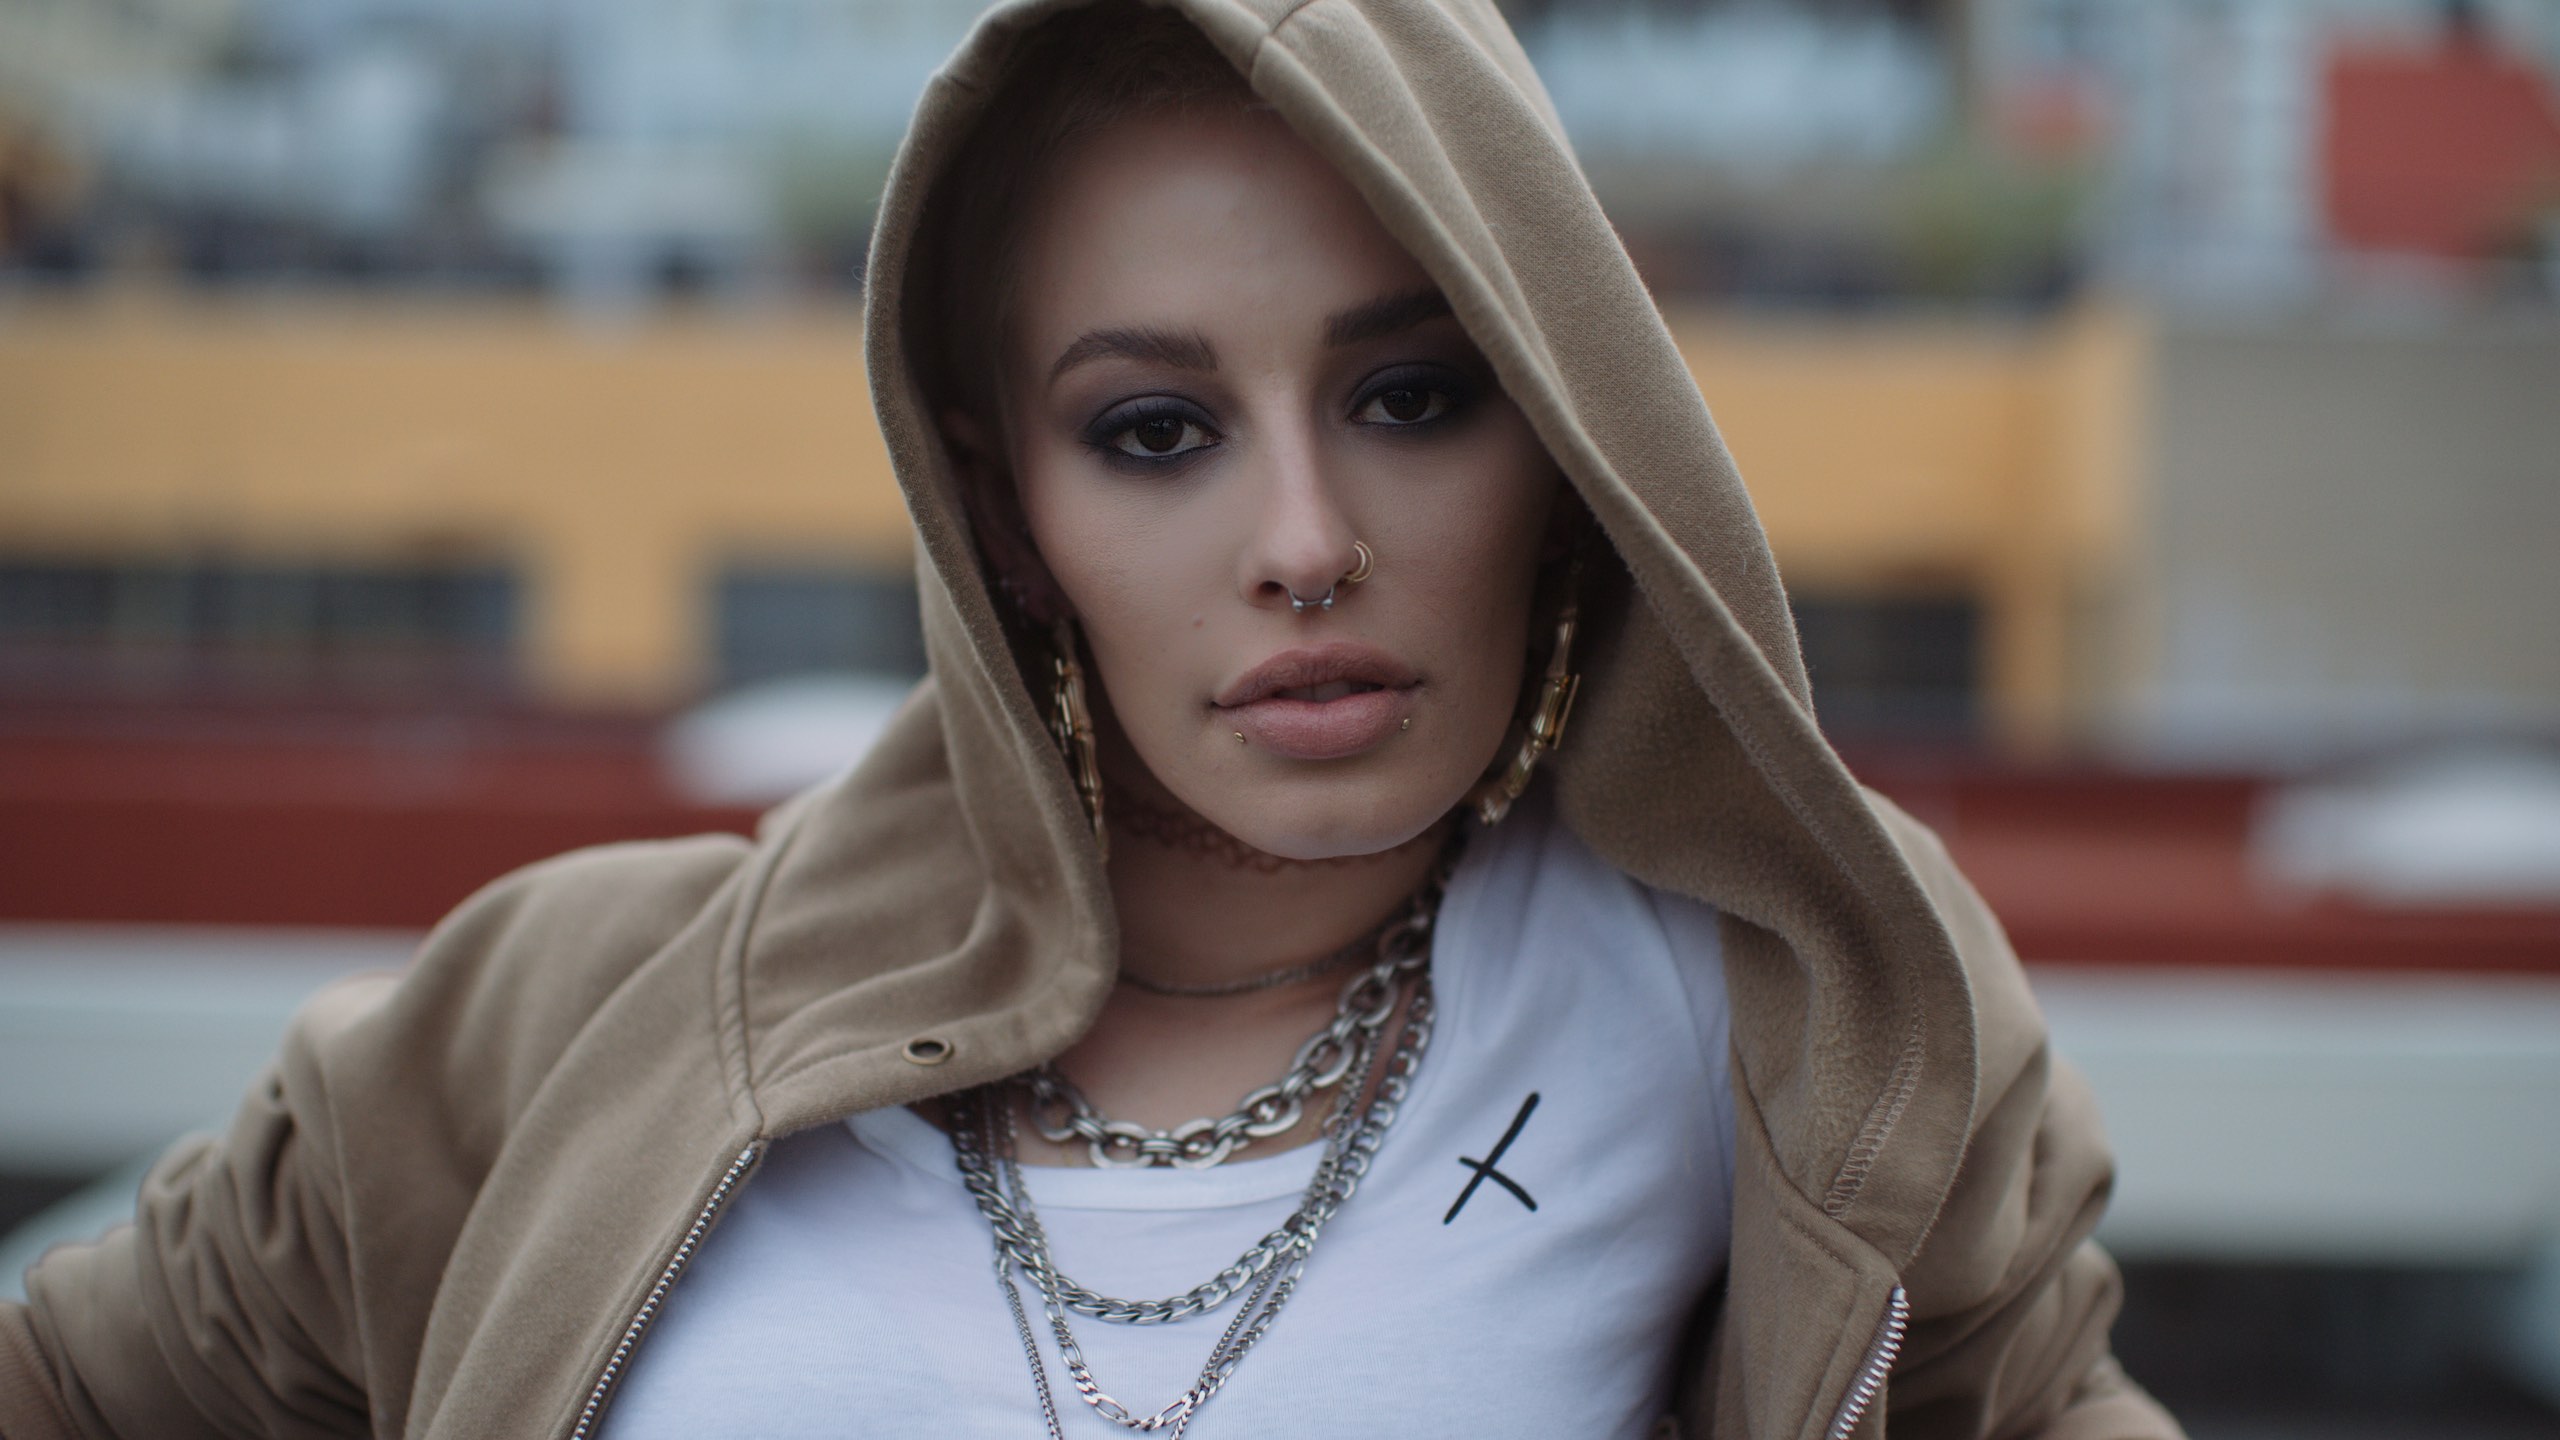 Headshot of woman with nose rings, earrings and chains wearing a beige hoodie